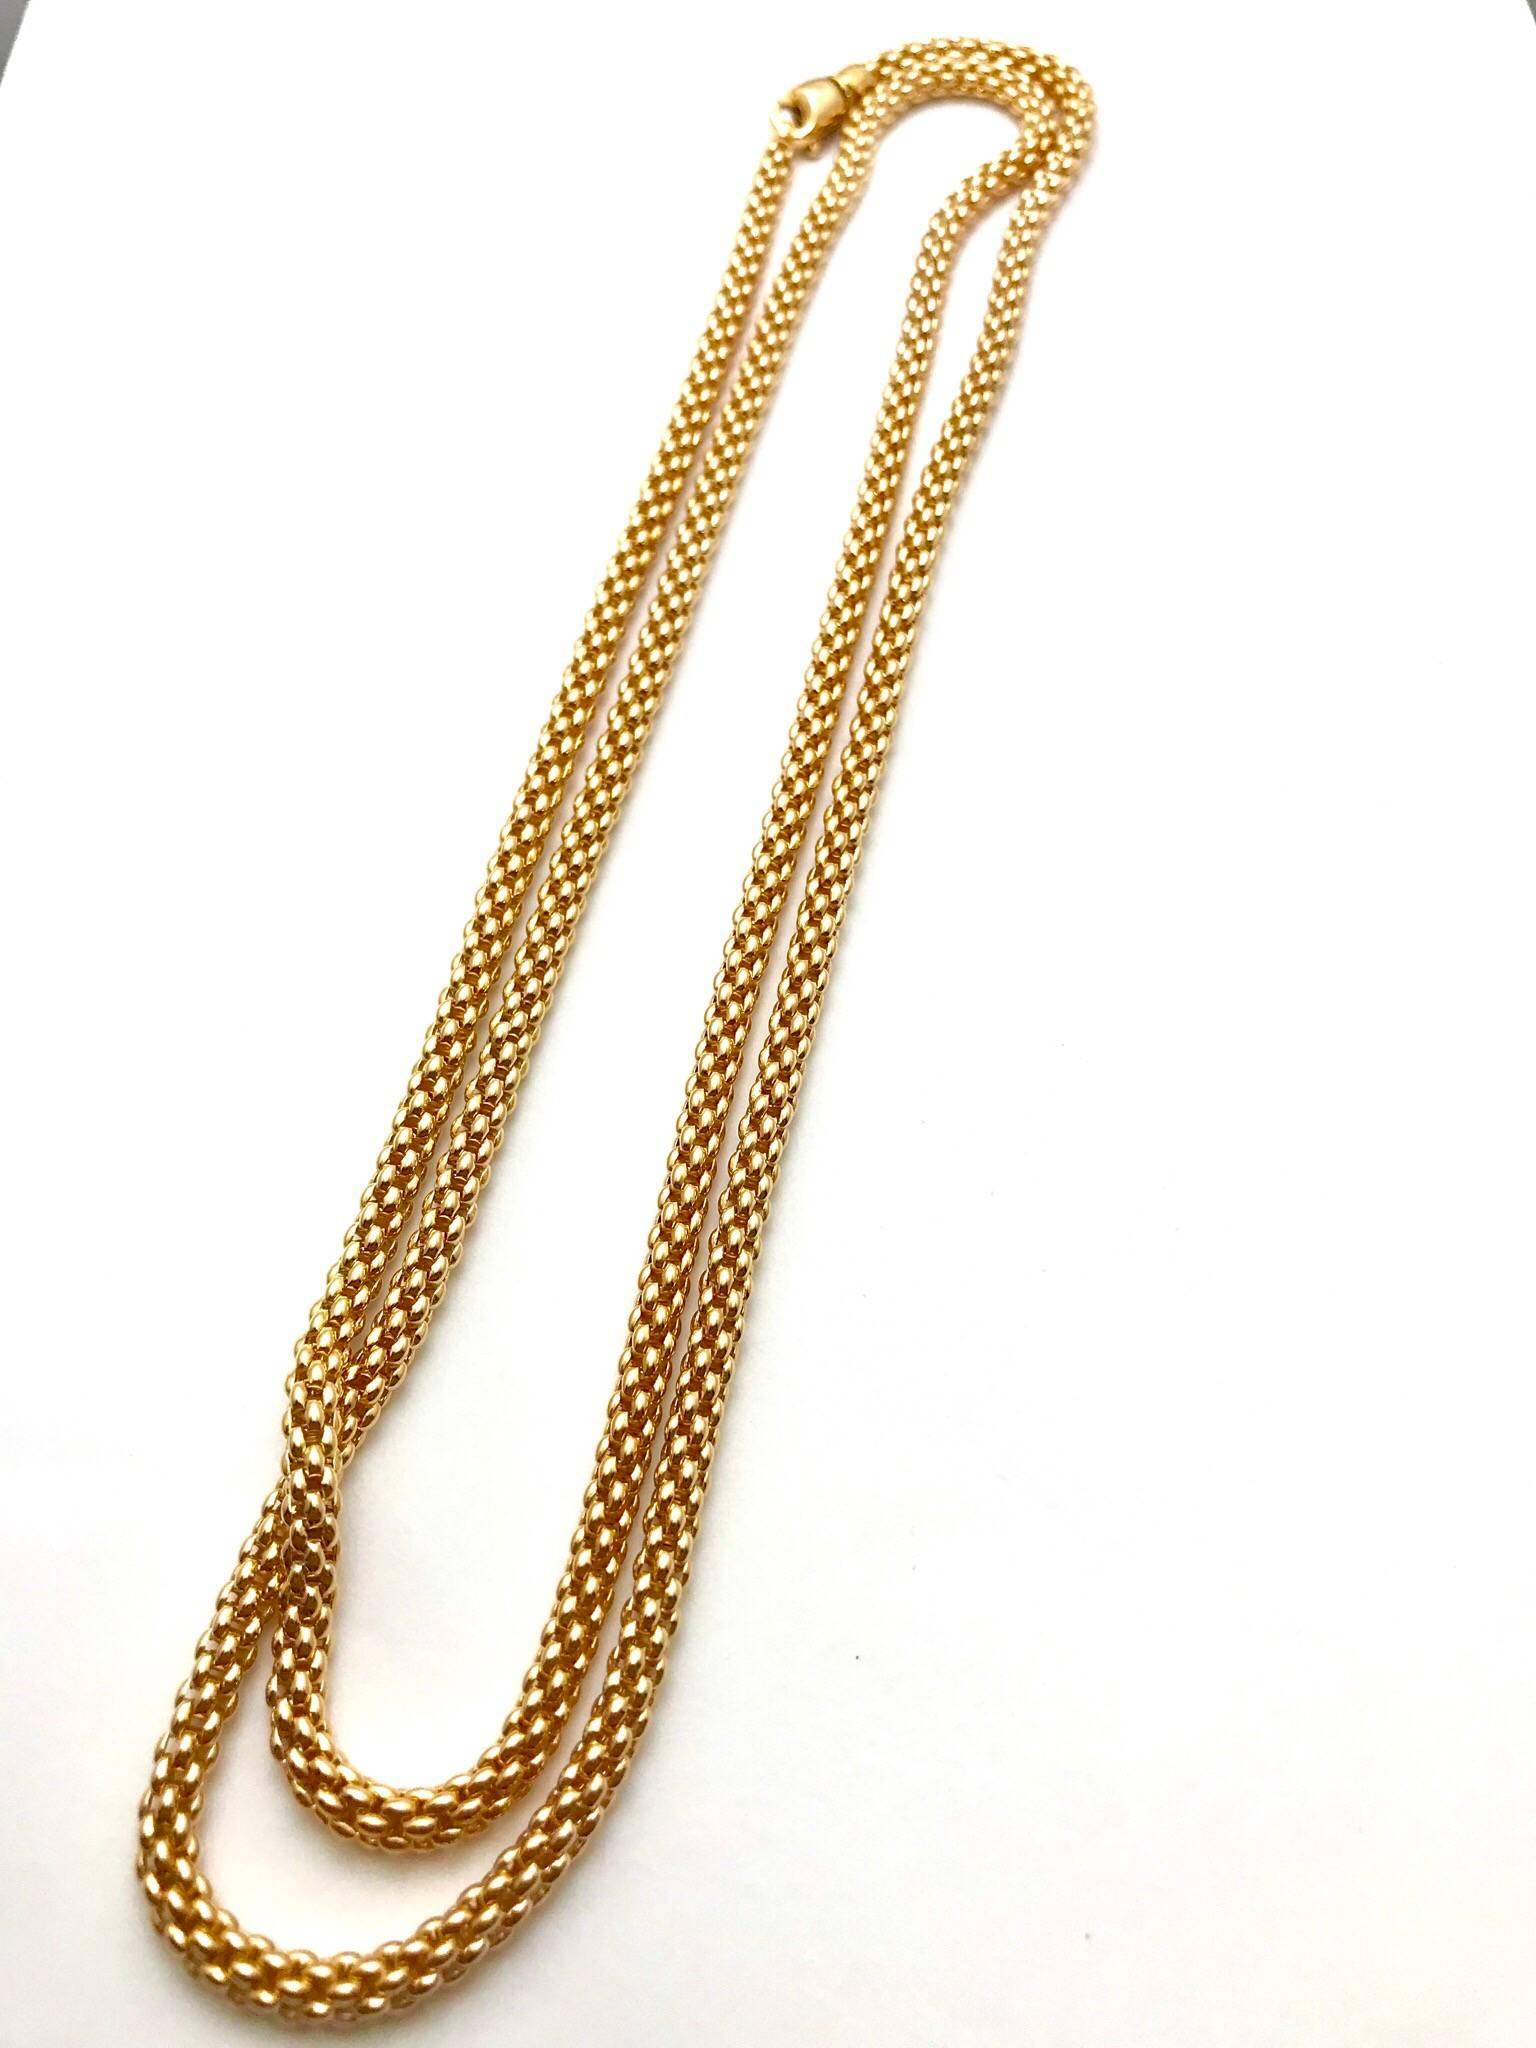 Fope Vendome 37.00 inch 18 karat woven rose gold Italian made necklace. Each individual link is slightly curved, creating an ultra soft feel. The necklace can easily be worn long or doubled up. This necklace also nests with yellow and white gold